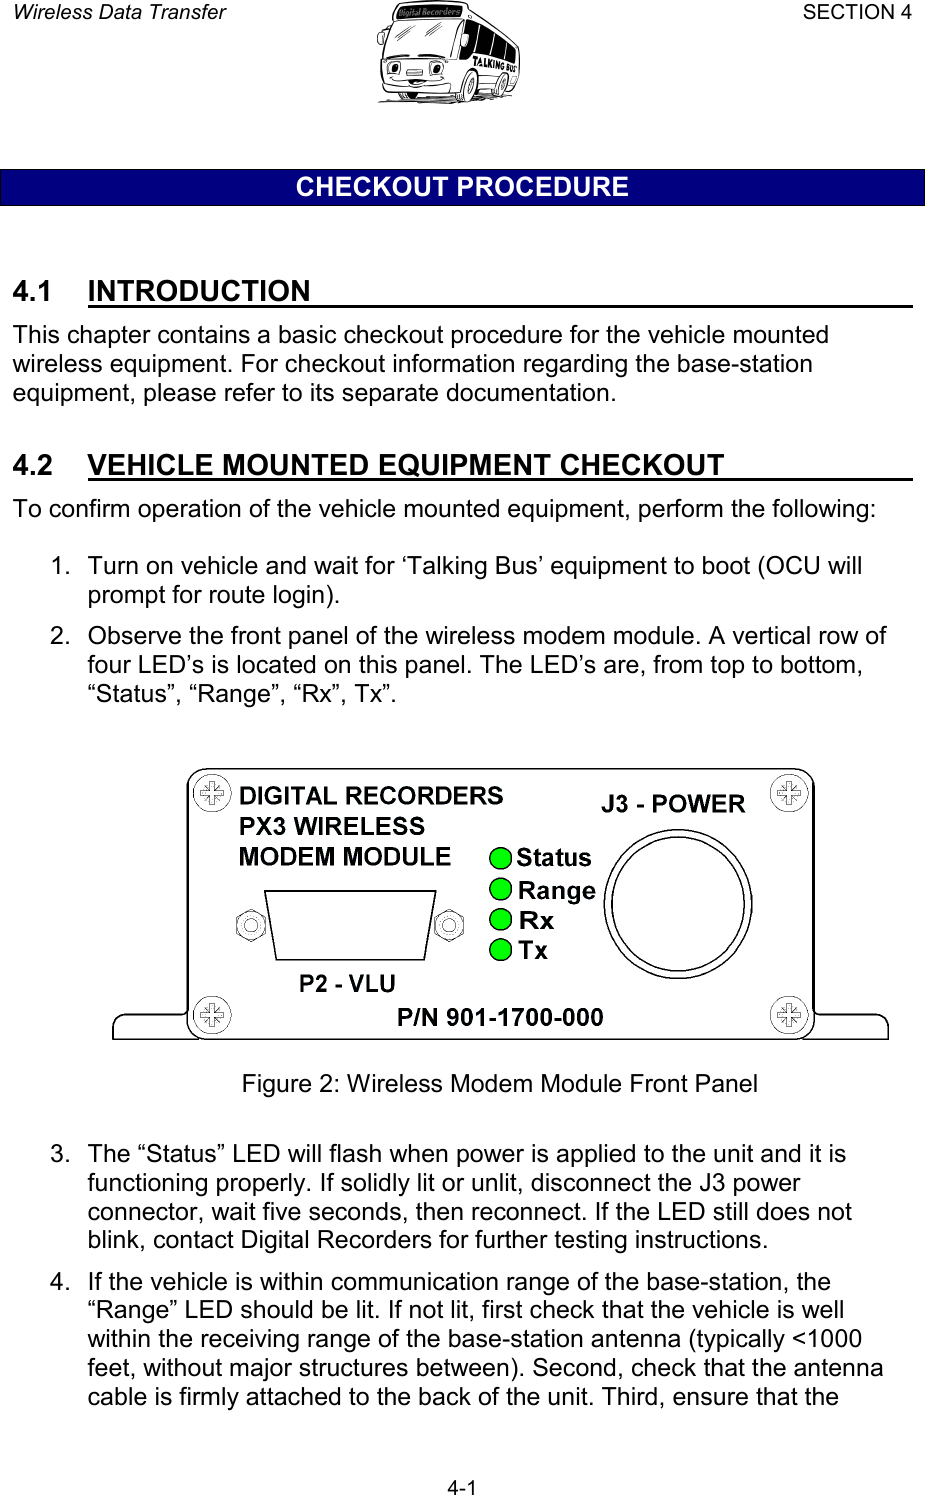 Wireless Data Transfer SECTION 4       4-1 CHECKOUT PROCEDURE  4.1 INTRODUCTION   This chapter contains a basic checkout procedure for the vehicle mounted wireless equipment. For checkout information regarding the base-station equipment, please refer to its separate documentation.  4.2  VEHICLE MOUNTED EQUIPMENT CHECKOUT   To confirm operation of the vehicle mounted equipment, perform the following:  1.  Turn on vehicle and wait for ‘Talking Bus’ equipment to boot (OCU will prompt for route login). 2.  Observe the front panel of the wireless modem module. A vertical row of four LED’s is located on this panel. The LED’s are, from top to bottom, “Status”, “Range”, “Rx”, Tx”.     Figure 2: Wireless Modem Module Front Panel  3.  The “Status” LED will flash when power is applied to the unit and it is functioning properly. If solidly lit or unlit, disconnect the J3 power connector, wait five seconds, then reconnect. If the LED still does not blink, contact Digital Recorders for further testing instructions. 4.  If the vehicle is within communication range of the base-station, the “Range” LED should be lit. If not lit, first check that the vehicle is well within the receiving range of the base-station antenna (typically &lt;1000 feet, without major structures between). Second, check that the antenna cable is firmly attached to the back of the unit. Third, ensure that the 